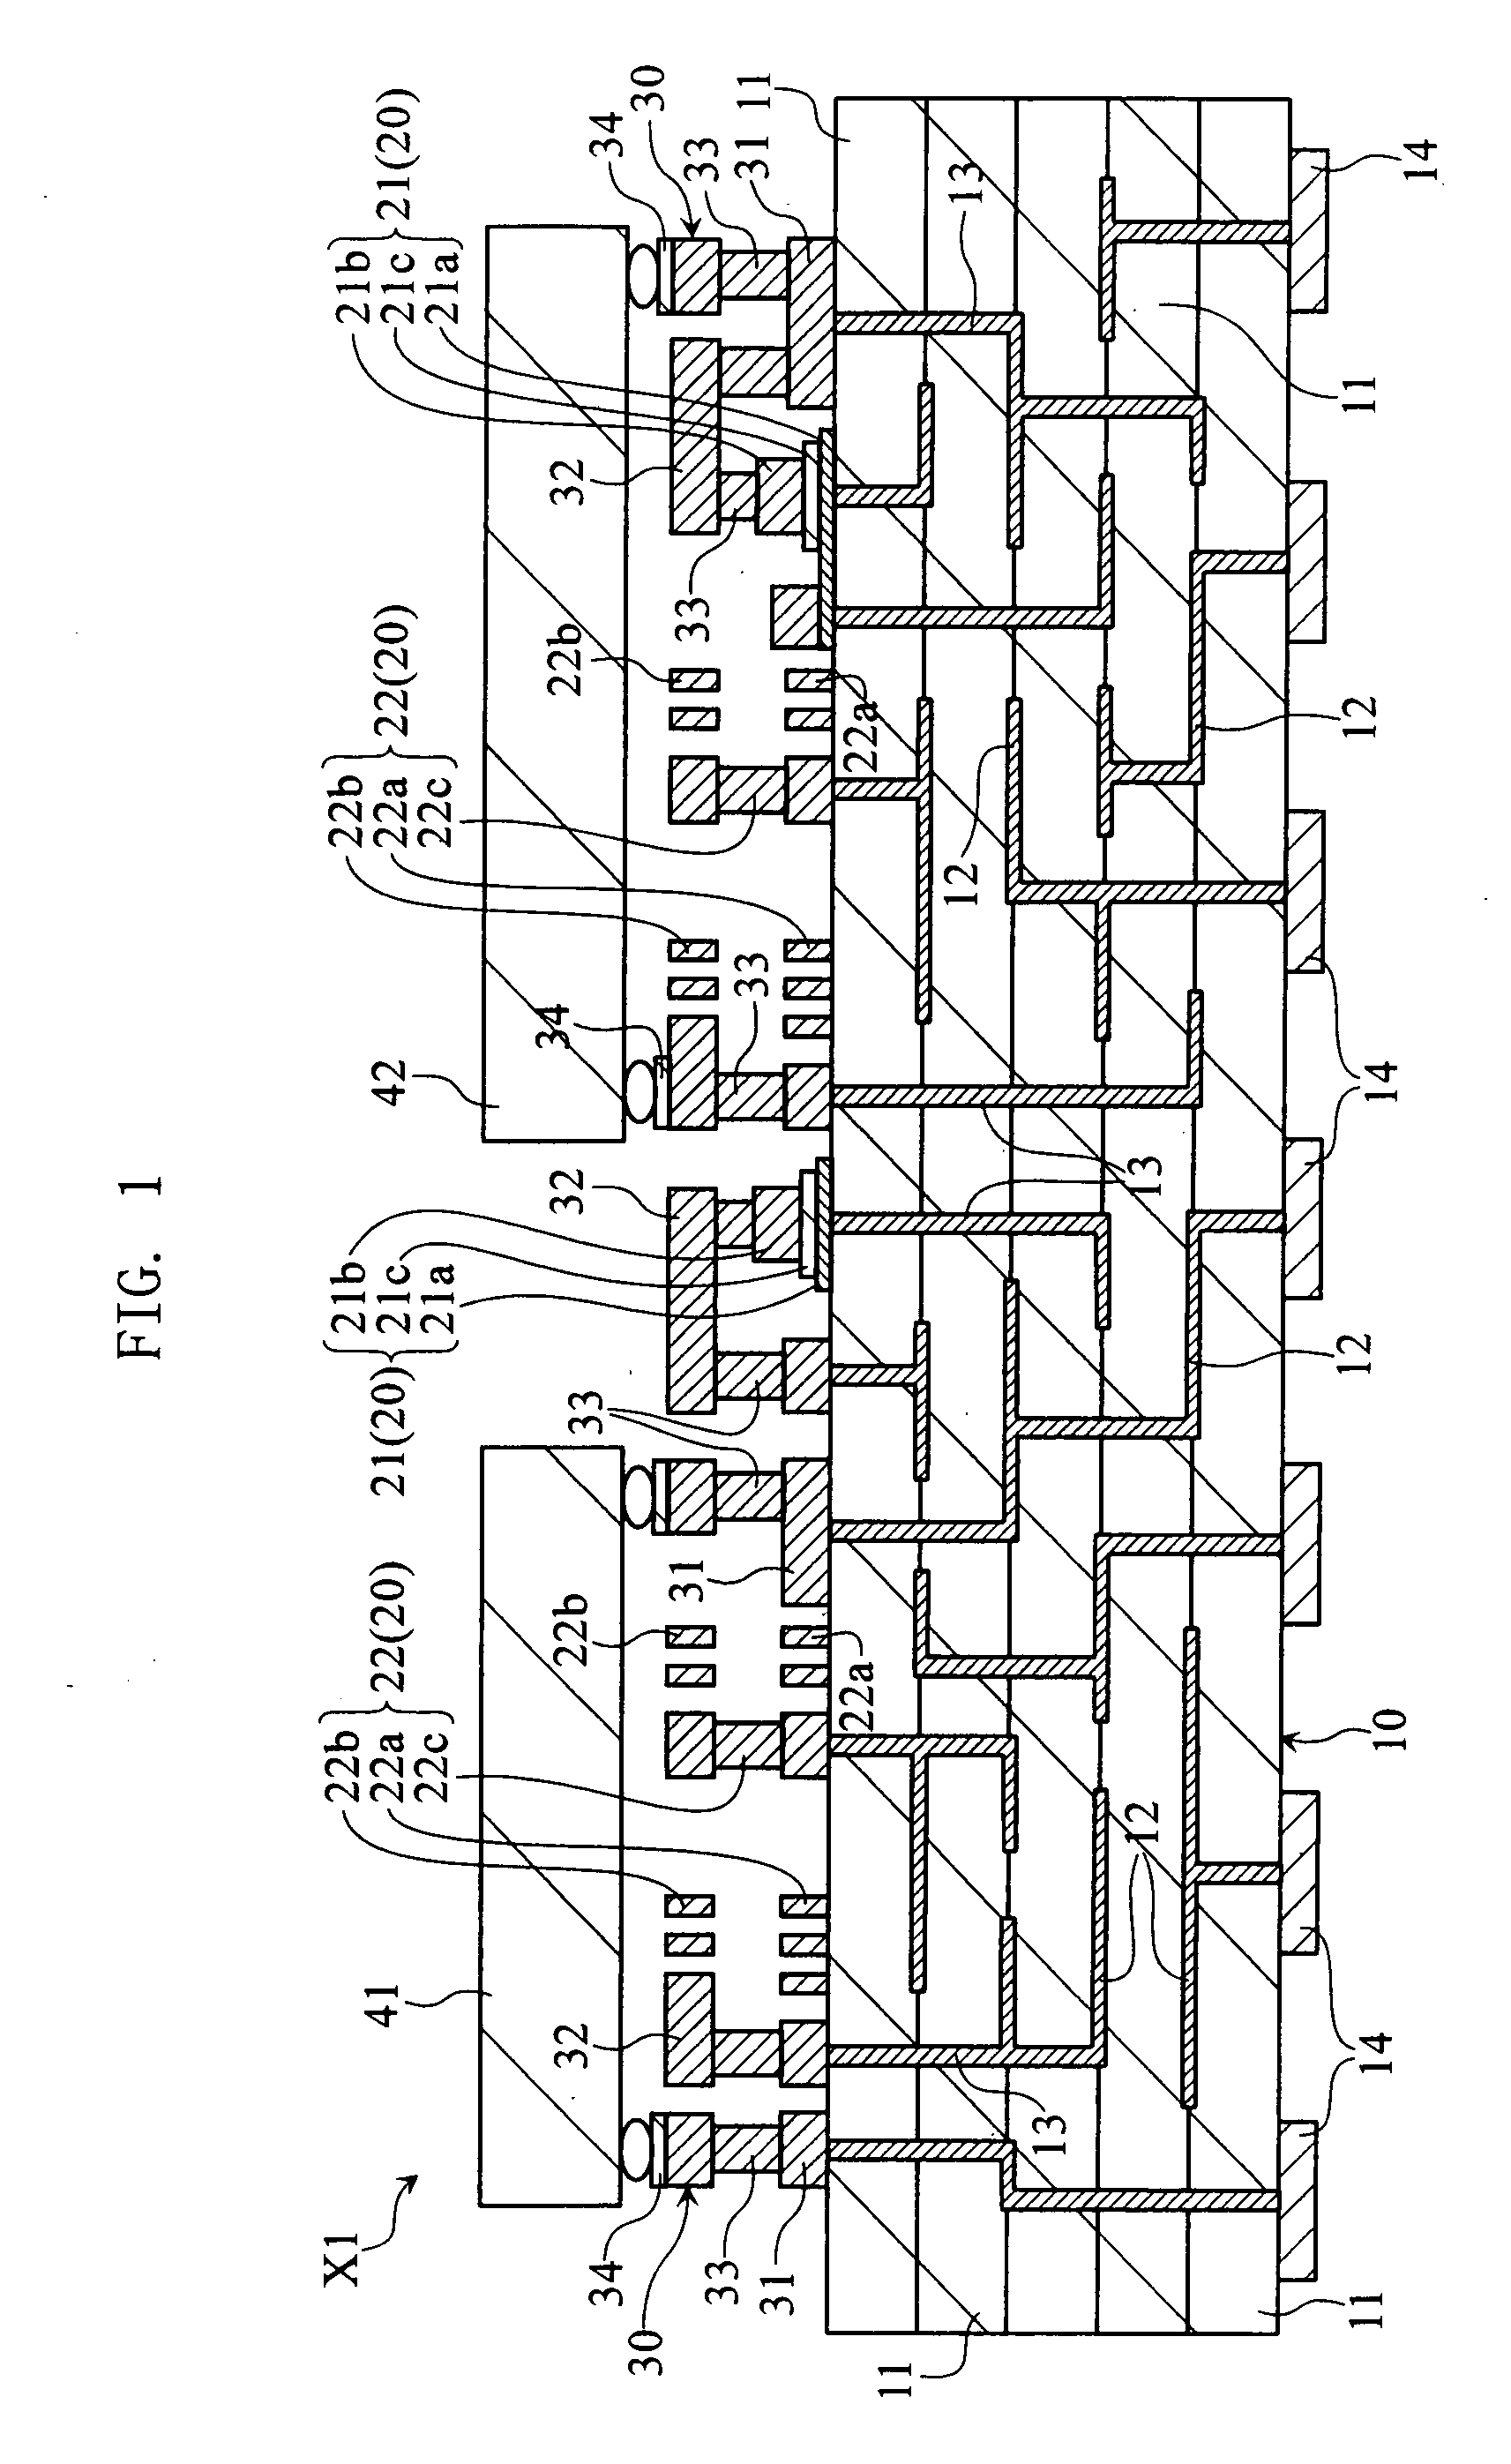 Electronic part module and method of making the same